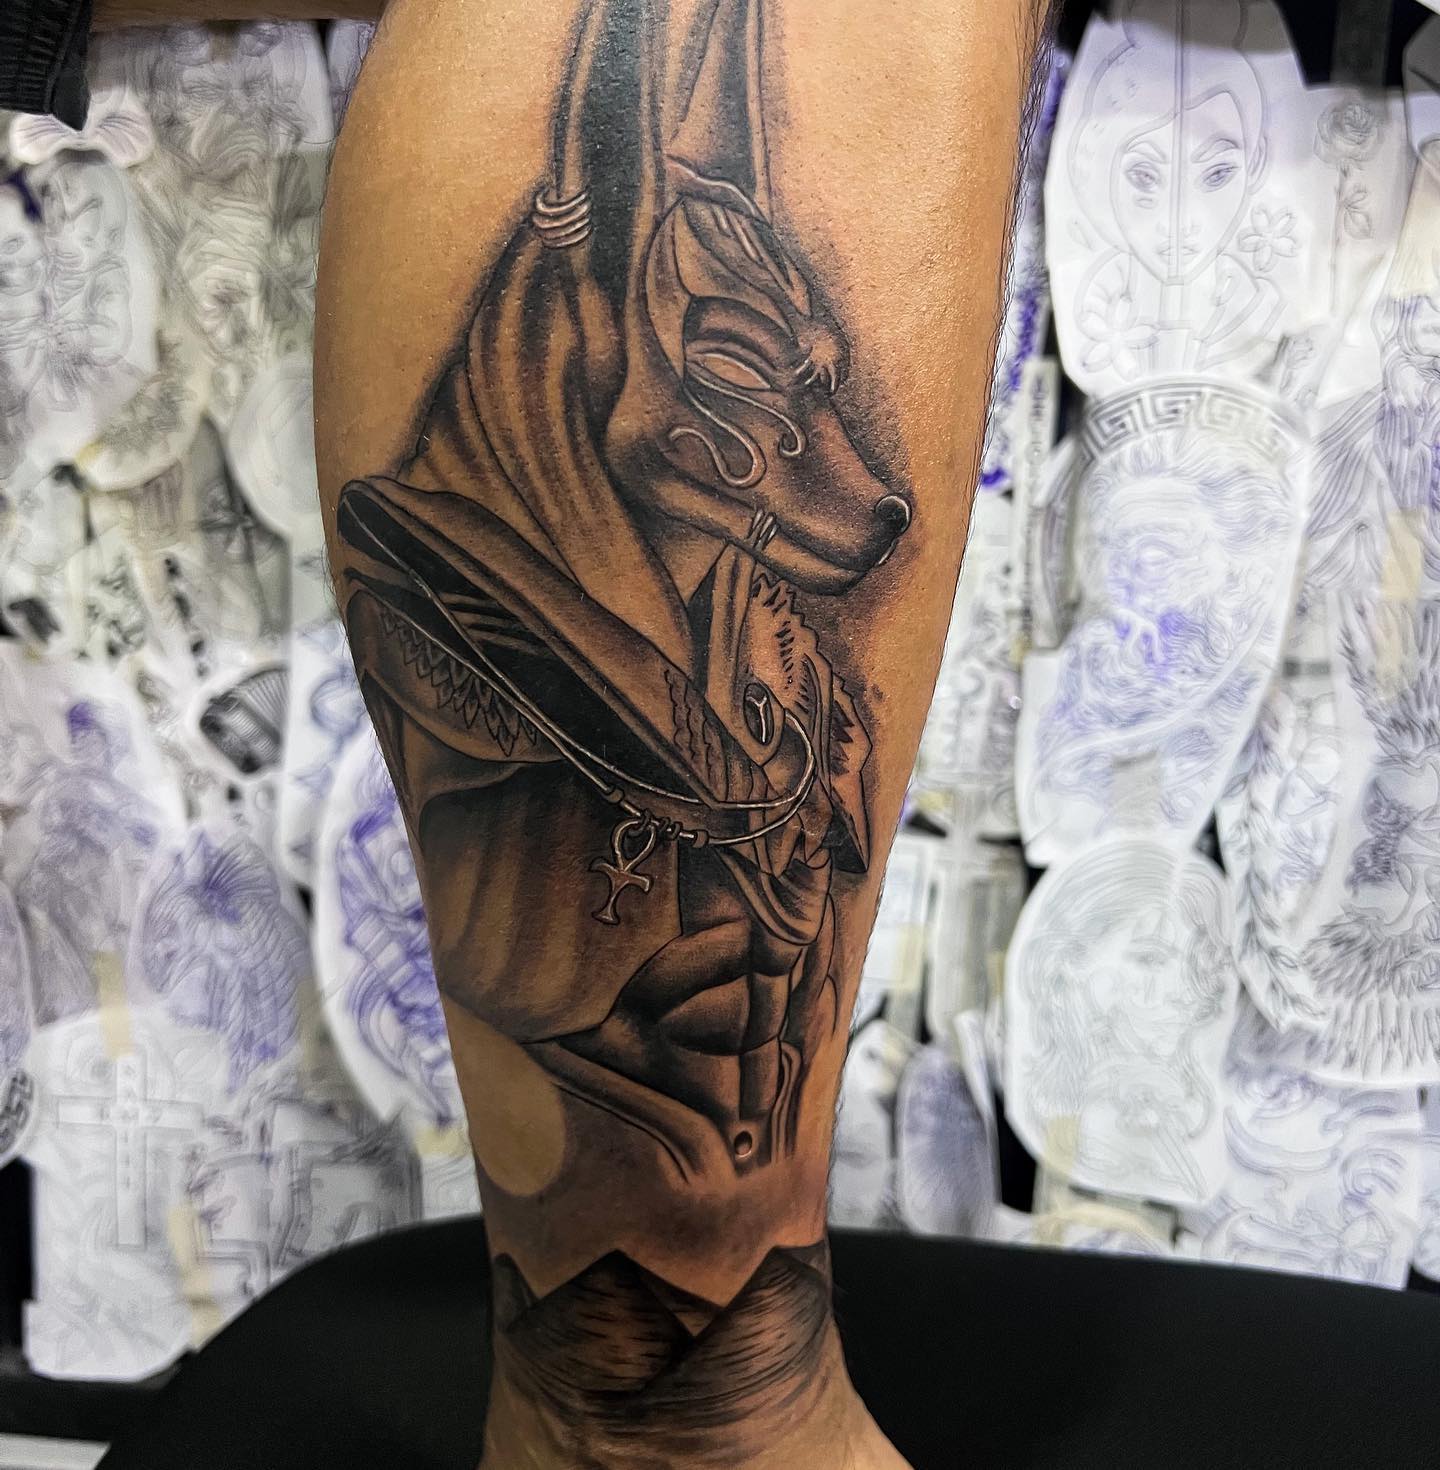 Lineworks and black ink, these are the things that an artist need to create this tattoo.